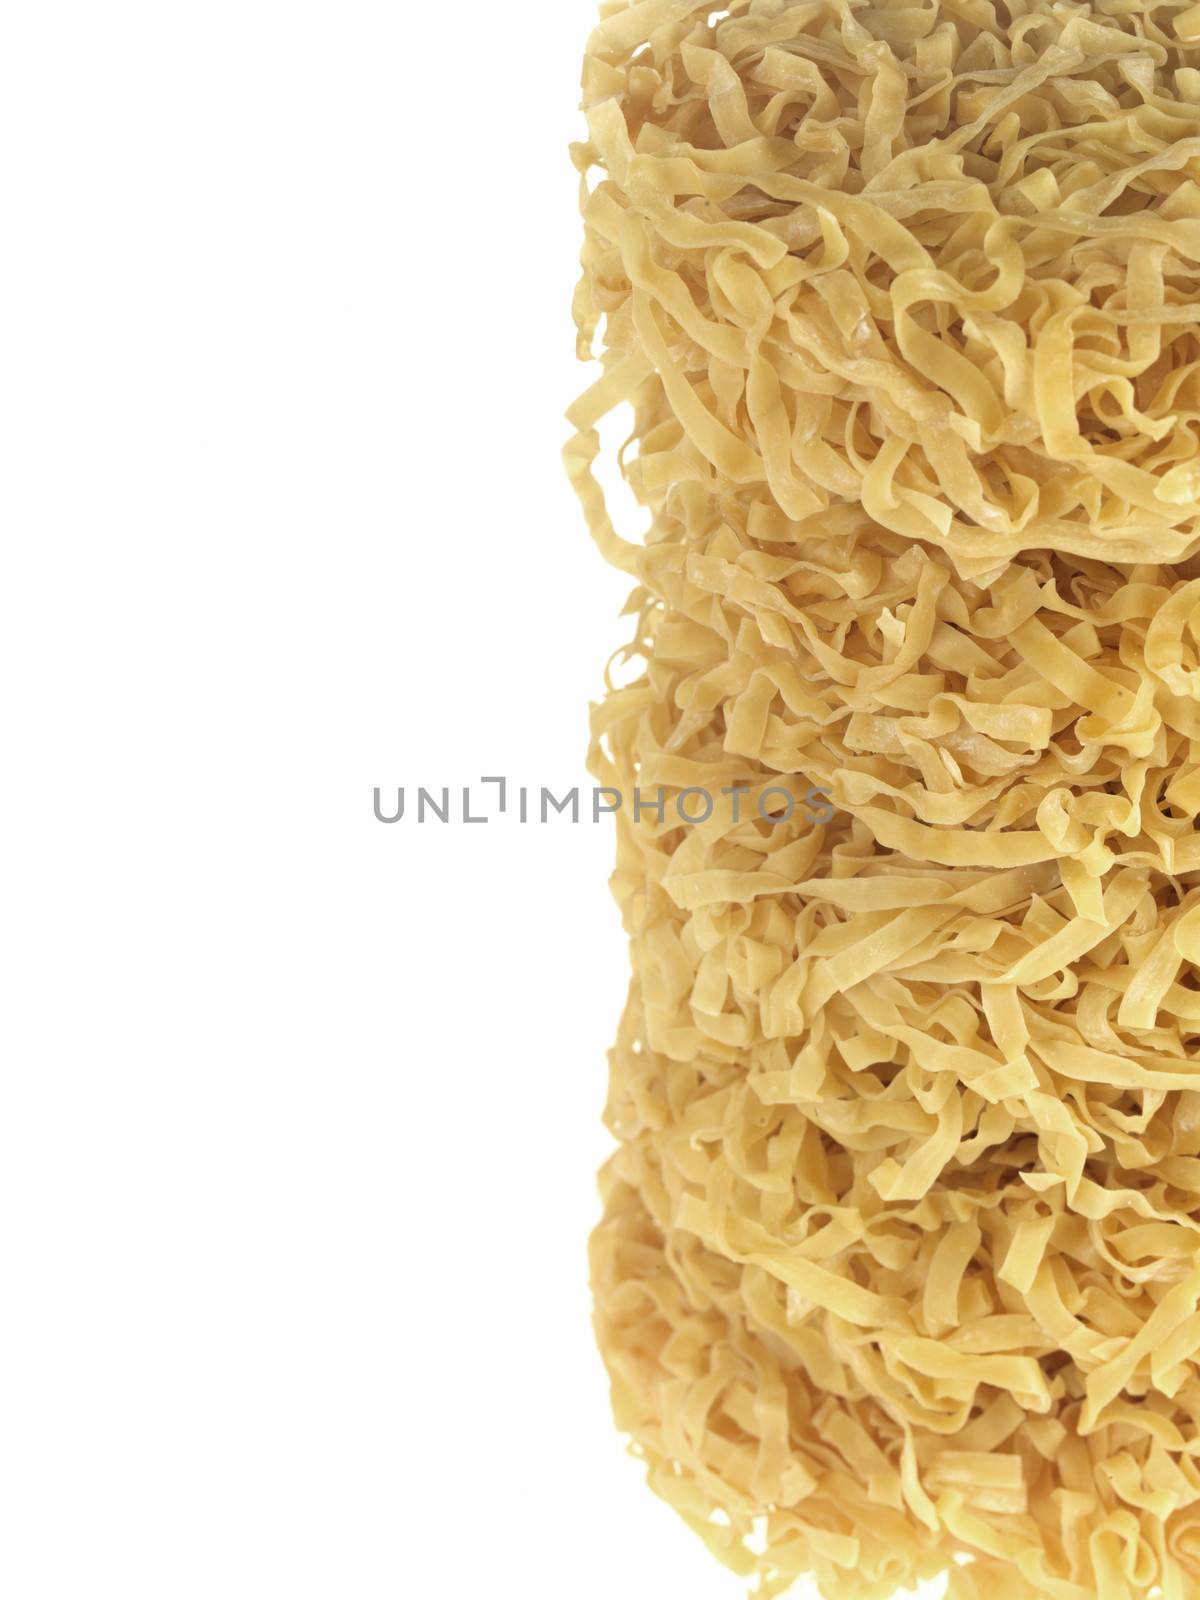 Dried Chinese Noodles by Whiteboxmedia